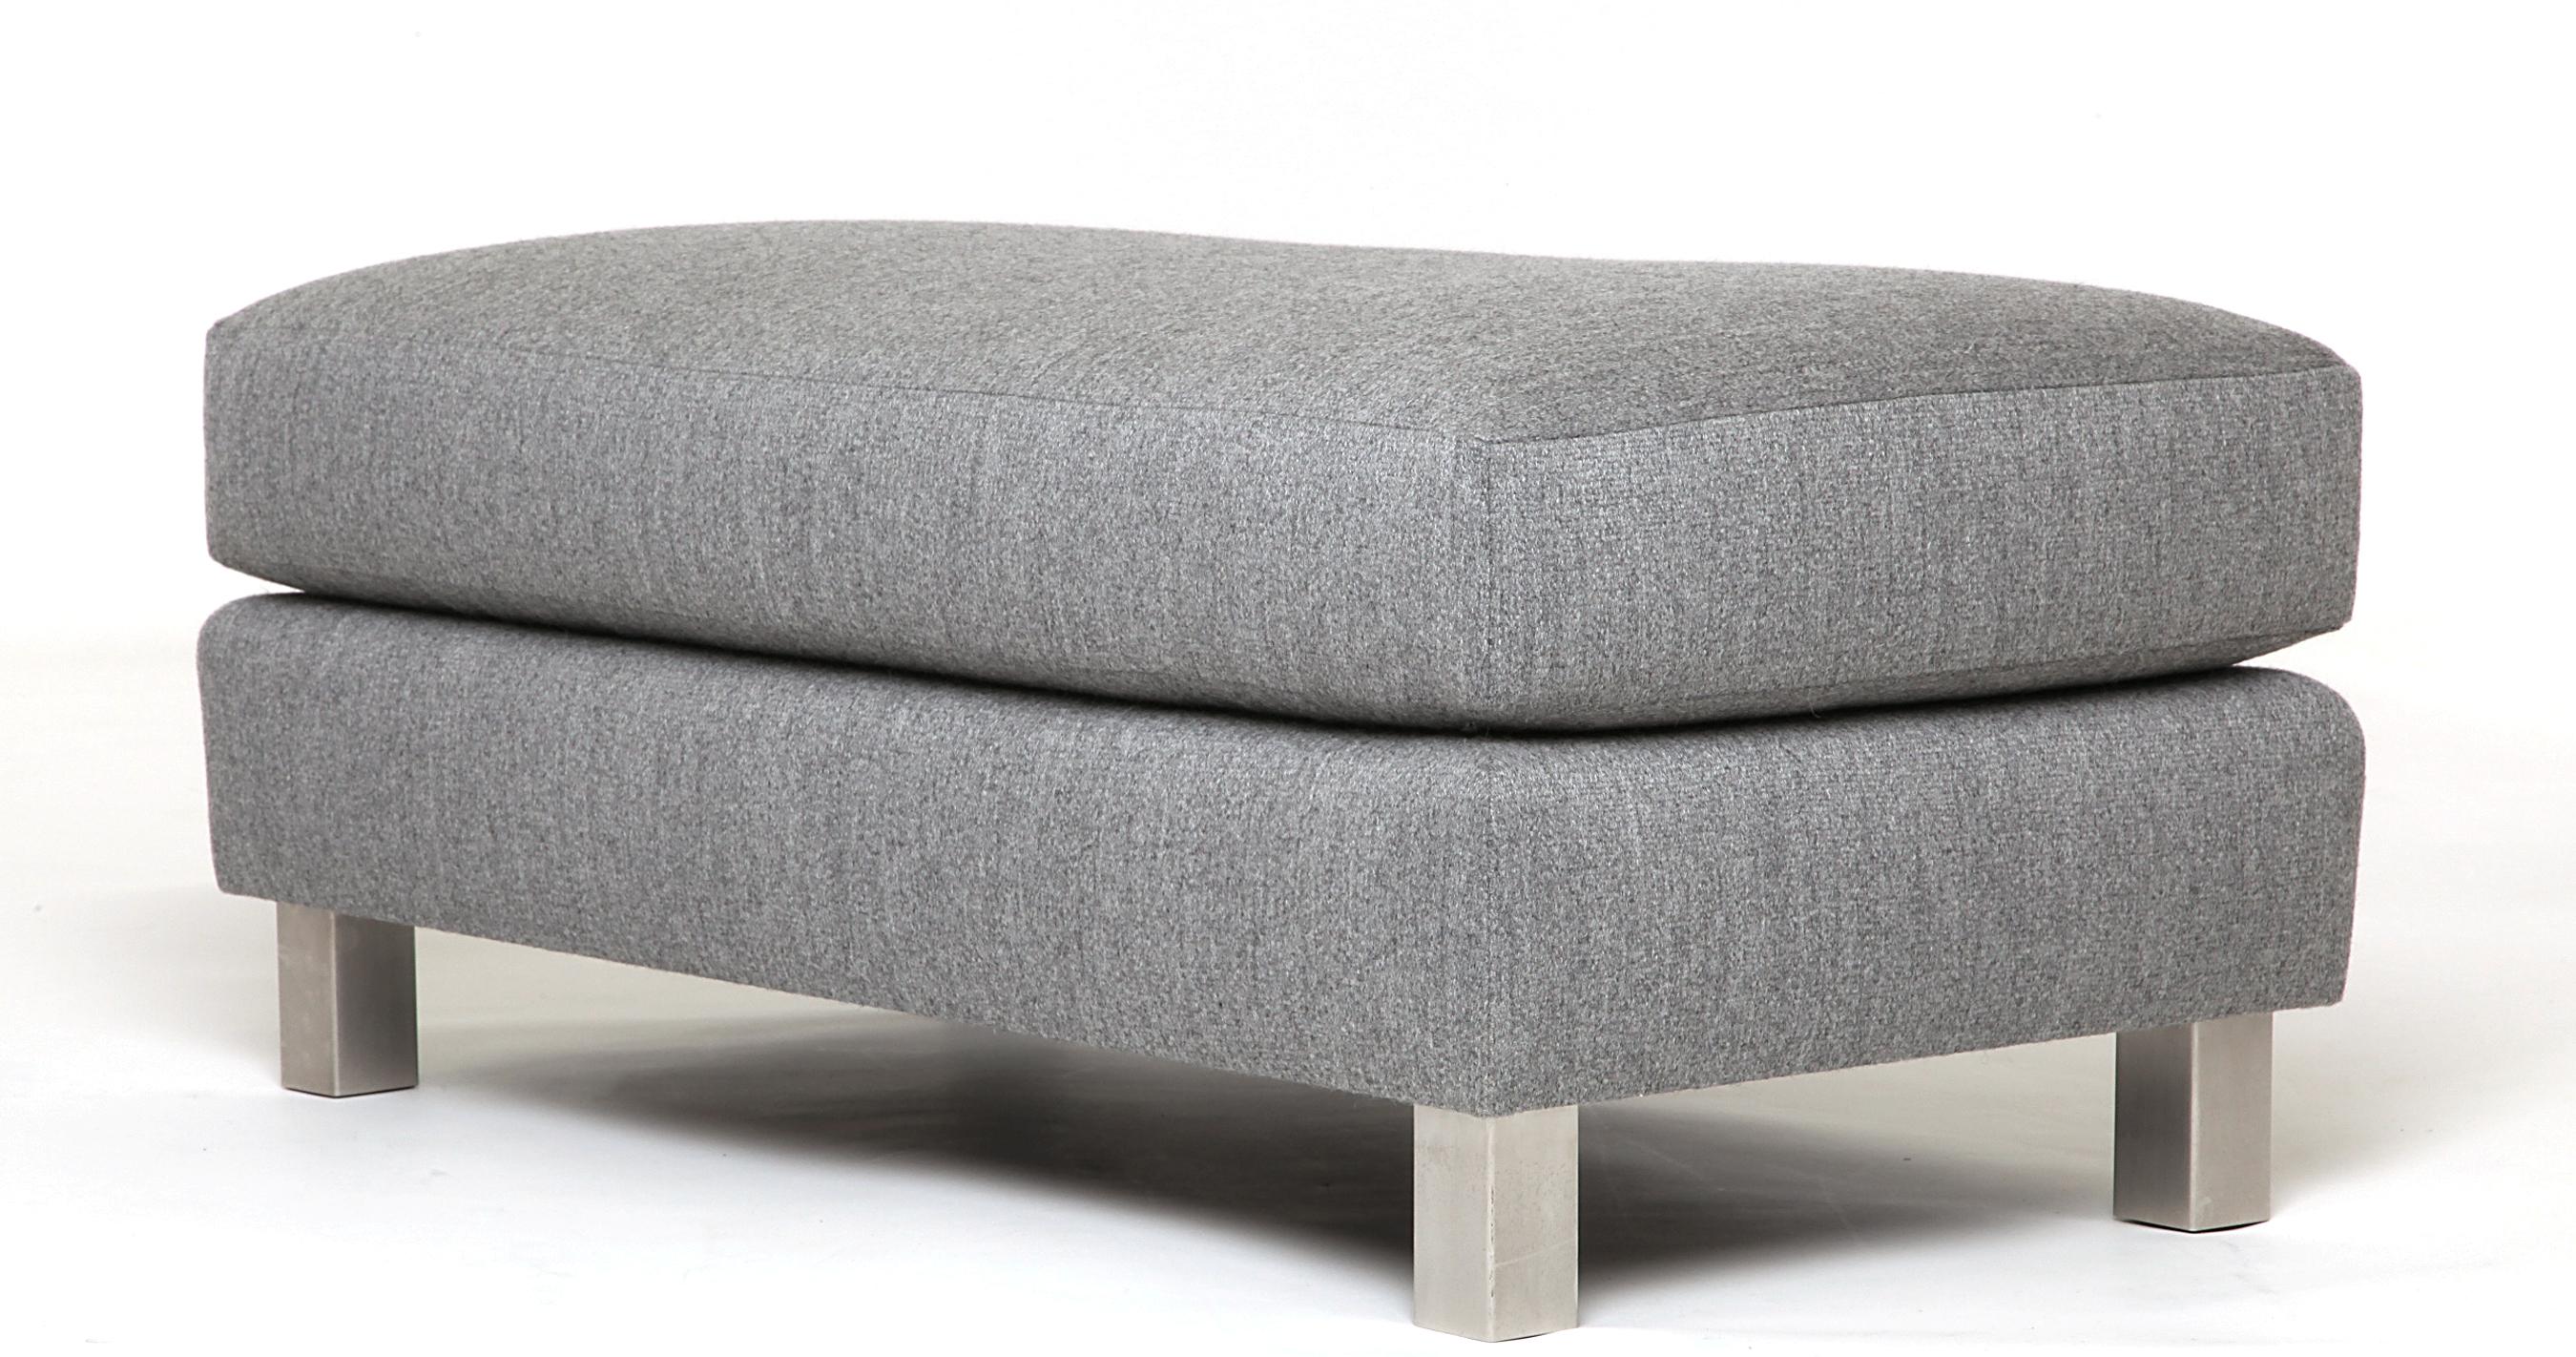 This ottoman is classically minimal with clean, simple lines and delicate, subtle top-stitched seam work.